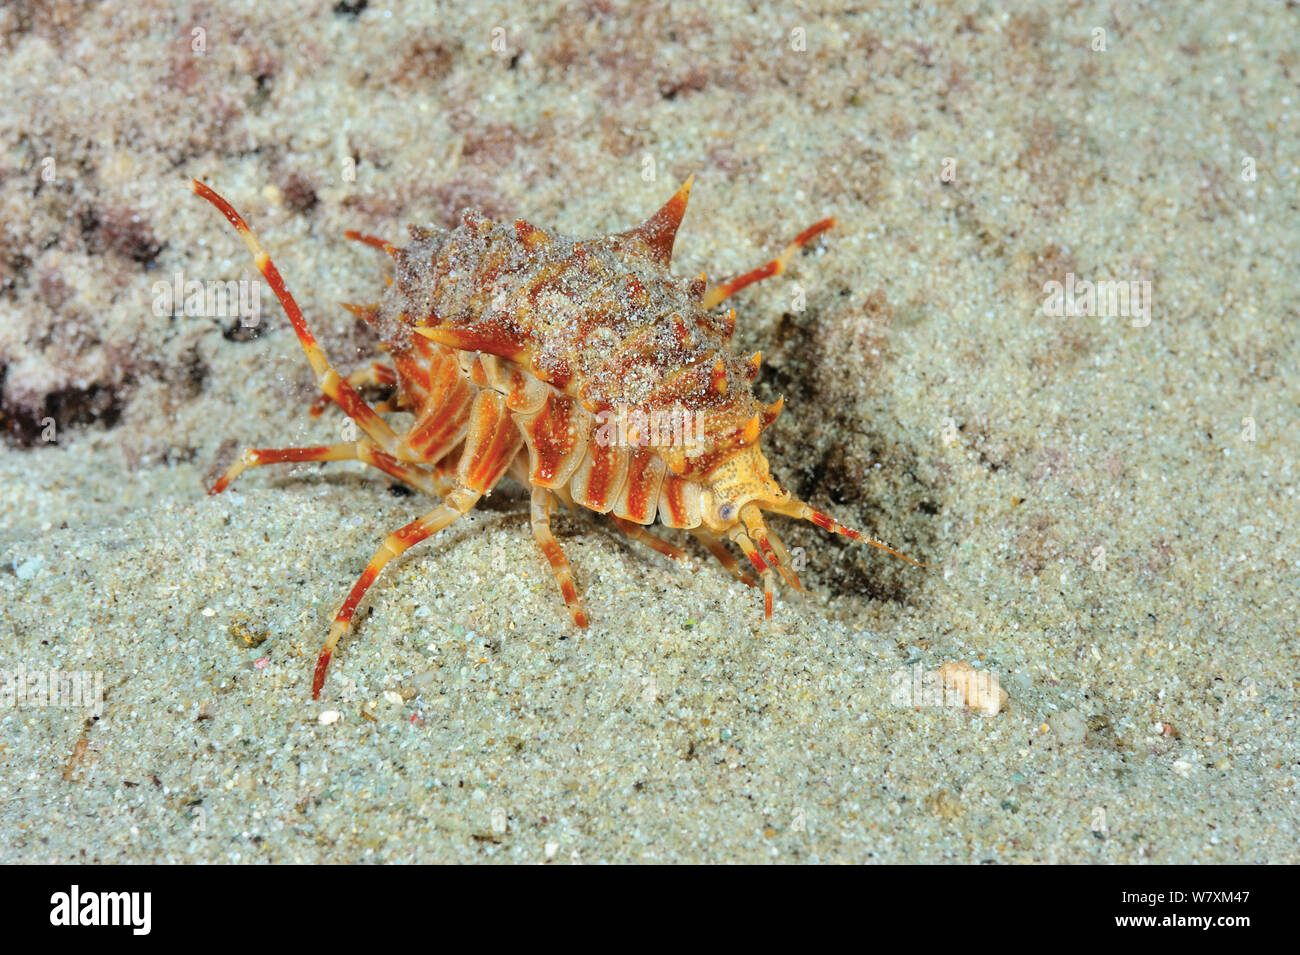 Amphipod (Cornugammarus maximus) endemic to Lake Baikal, found near the Ushkaniye islands and Svyatoy Nos Peninsula, along the eastern shore. Species believed to be in decline. Russia, September. Stock Photo